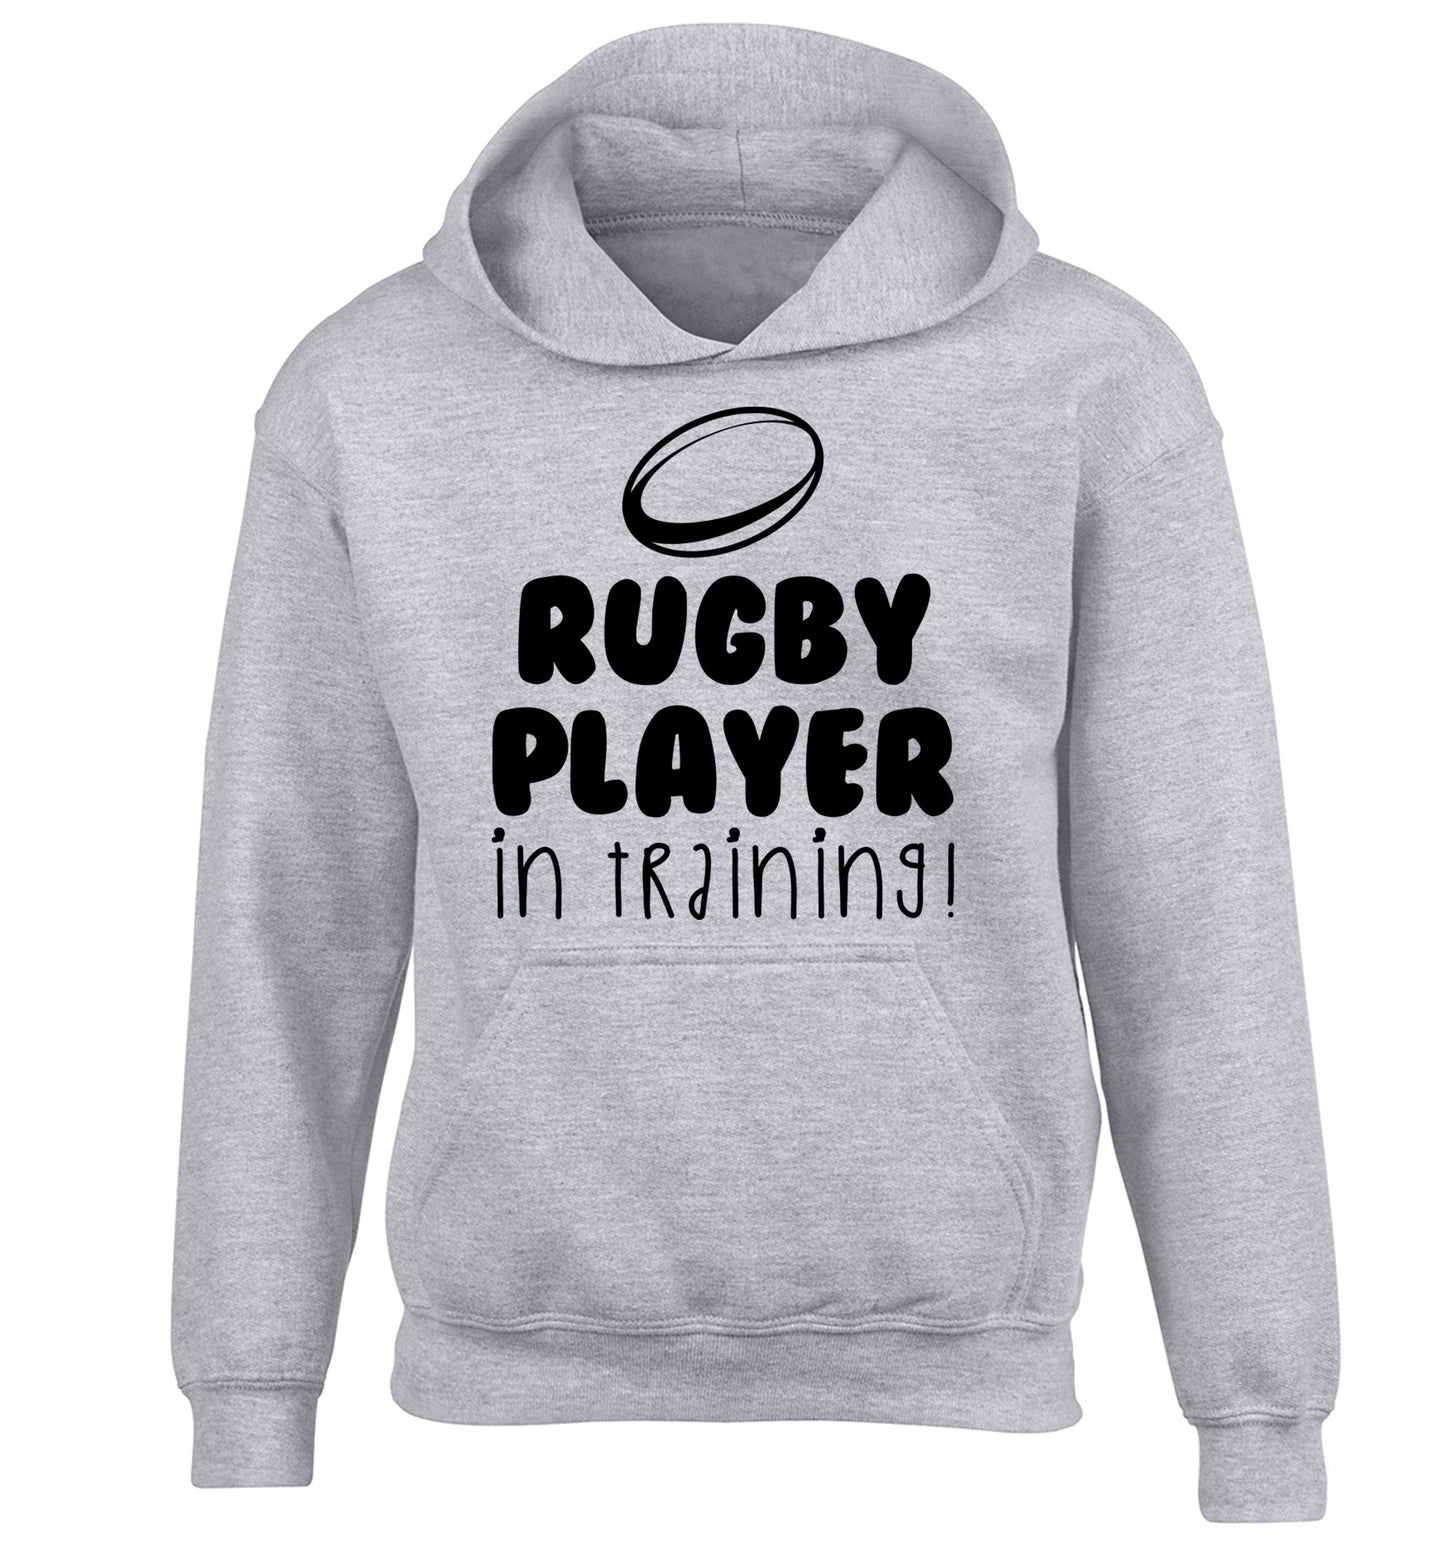 Rugby player in training children's grey hoodie 12-14 Years